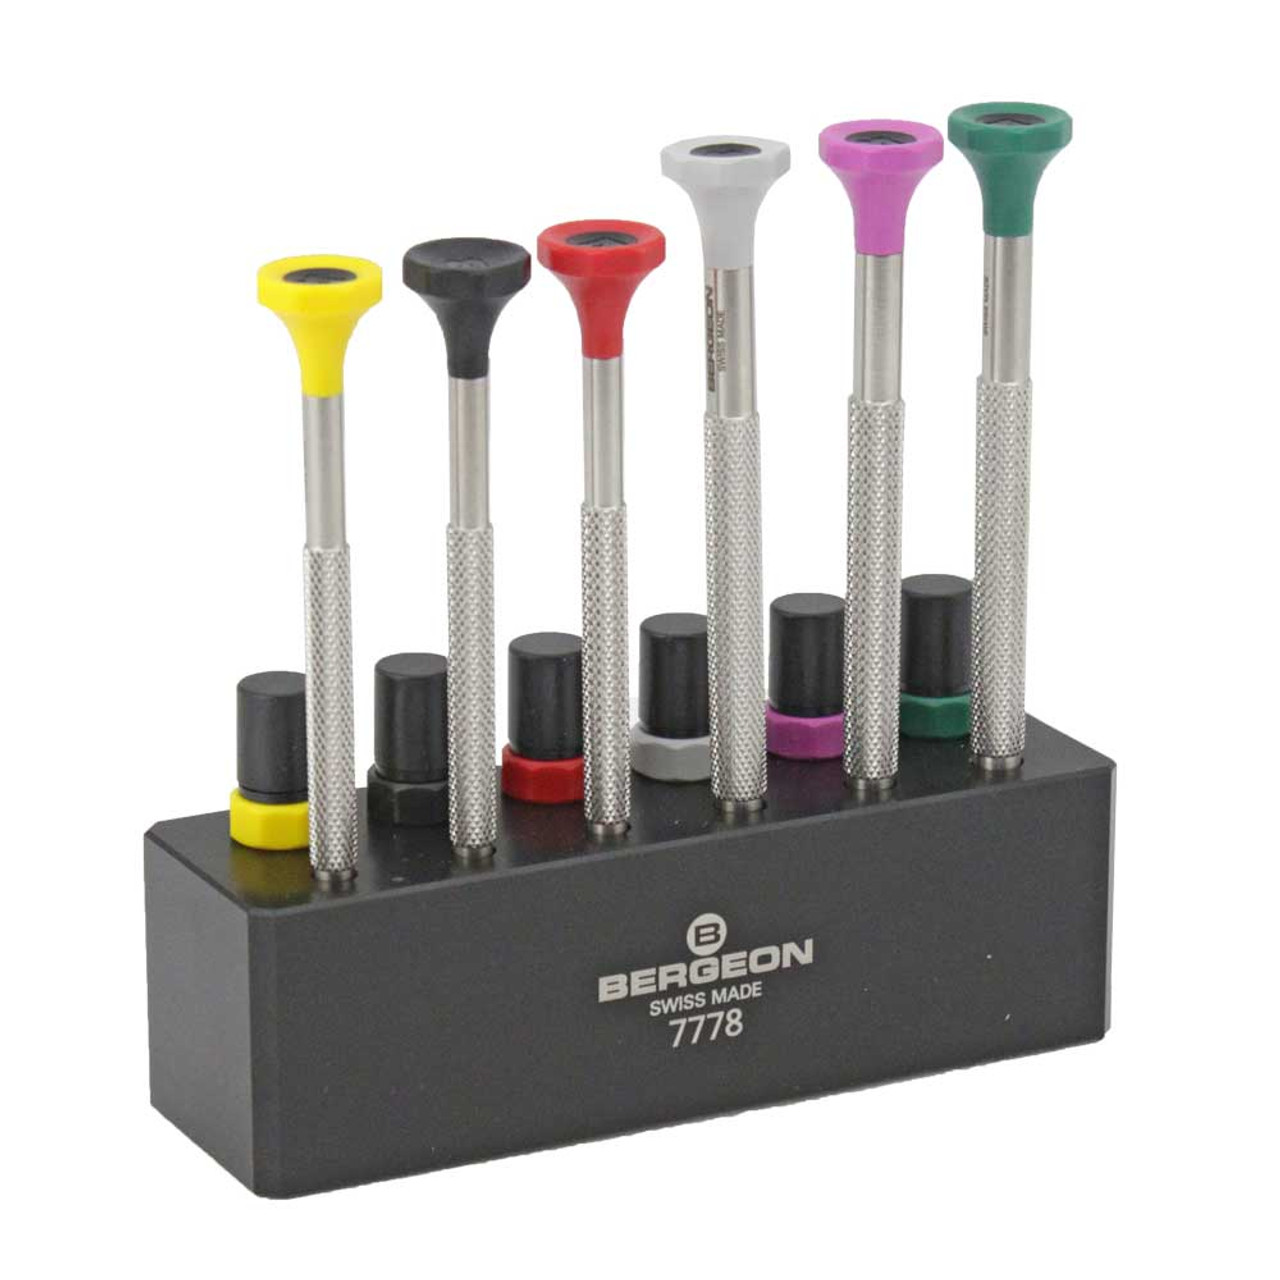 Bergeon 7778 6 Piece Screwdriver Set with Spare Blades and Screwdriver Stand